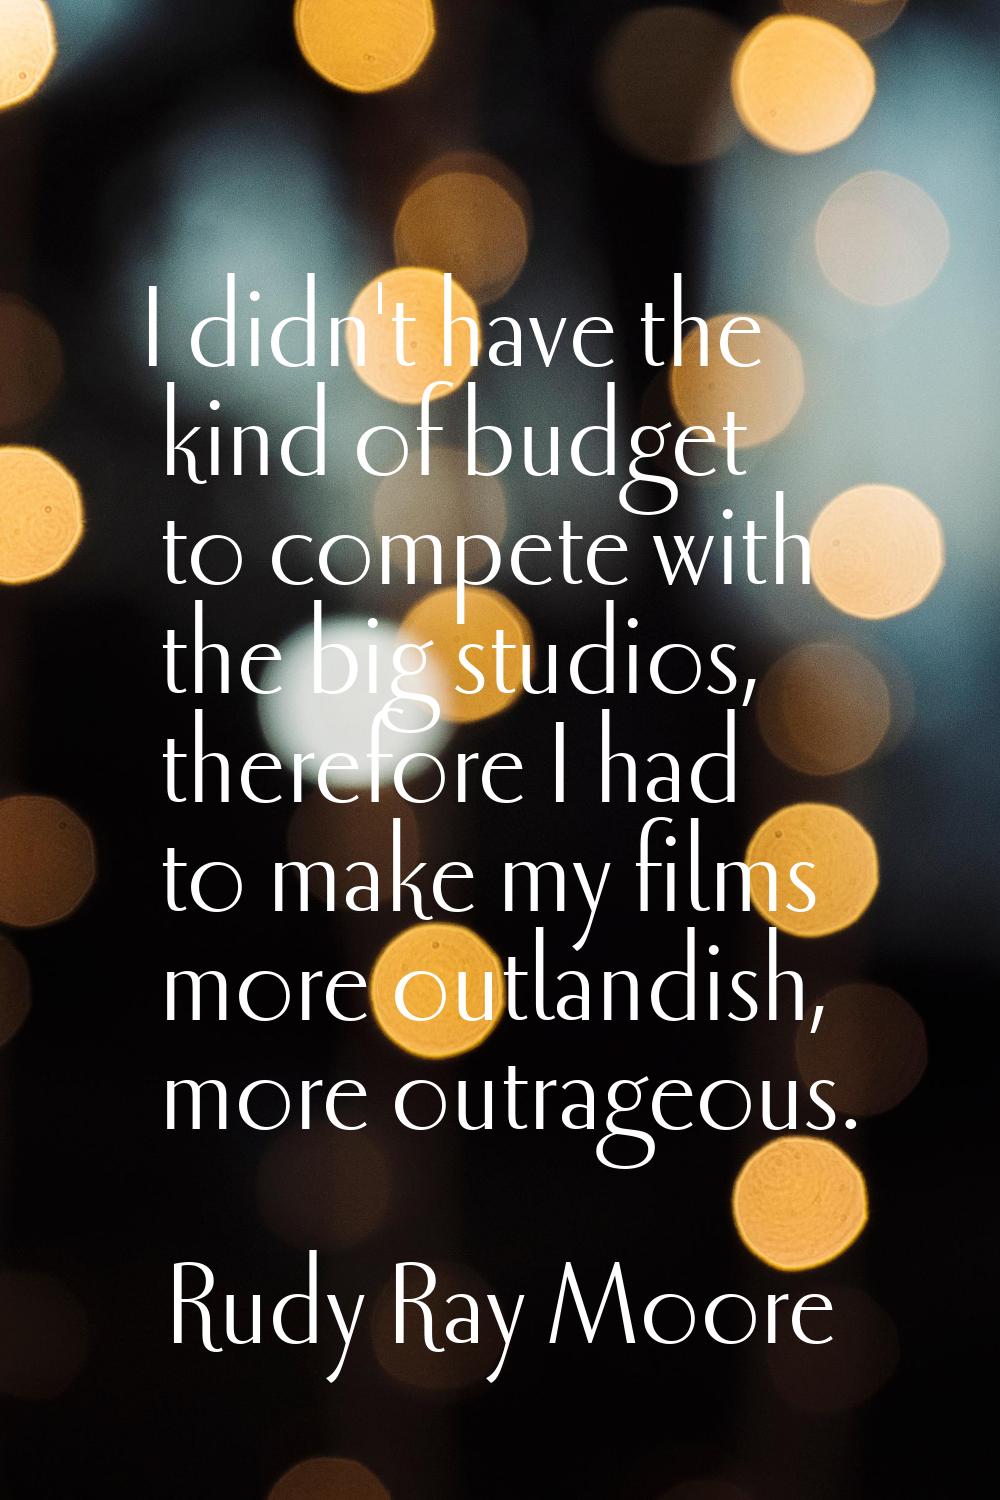 I didn't have the kind of budget to compete with the big studios, therefore I had to make my films 